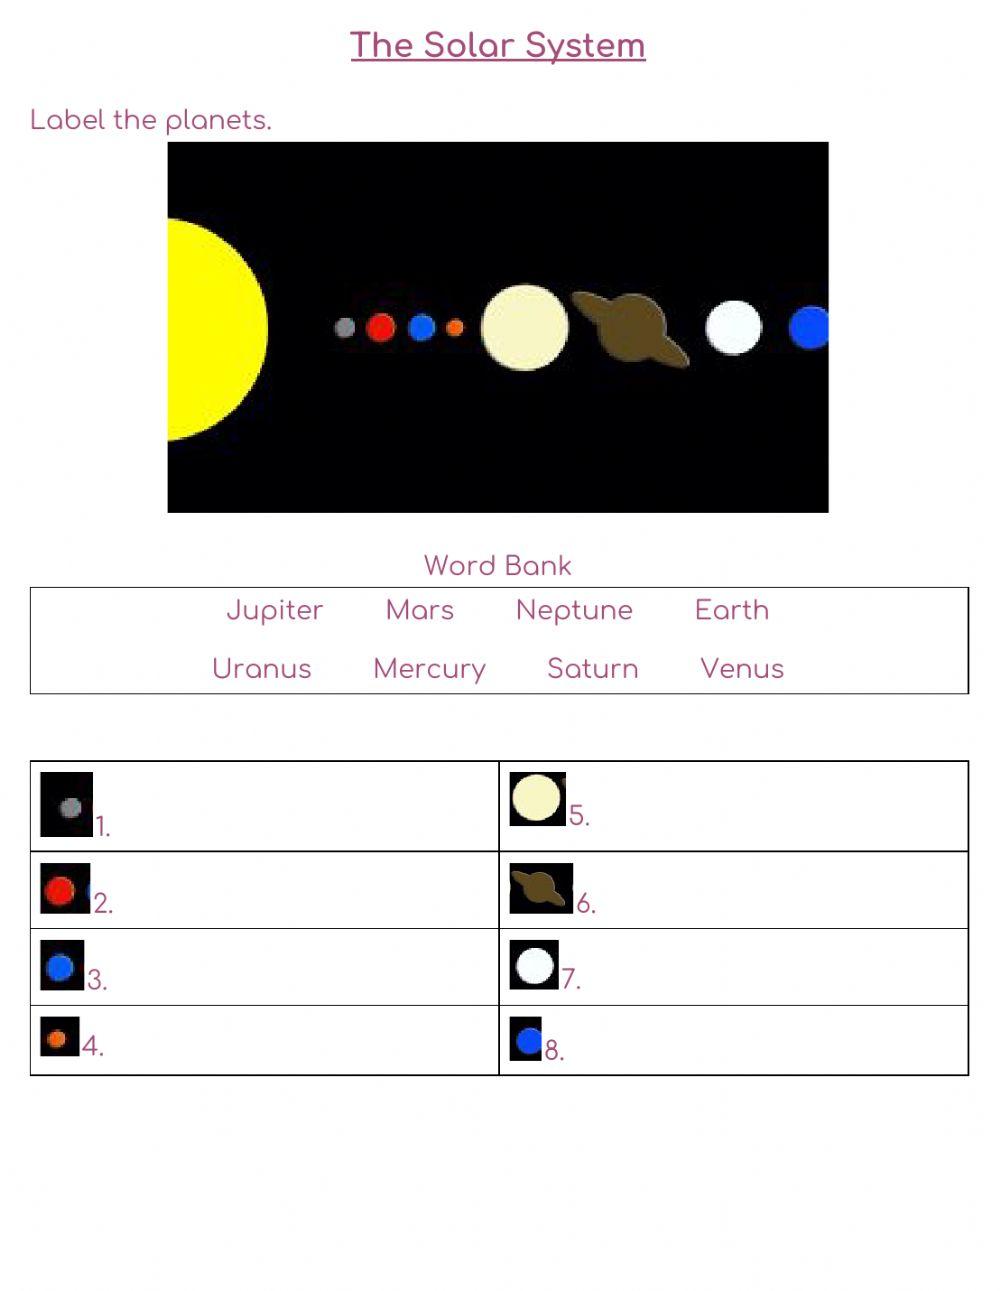 Position-Order of Planets